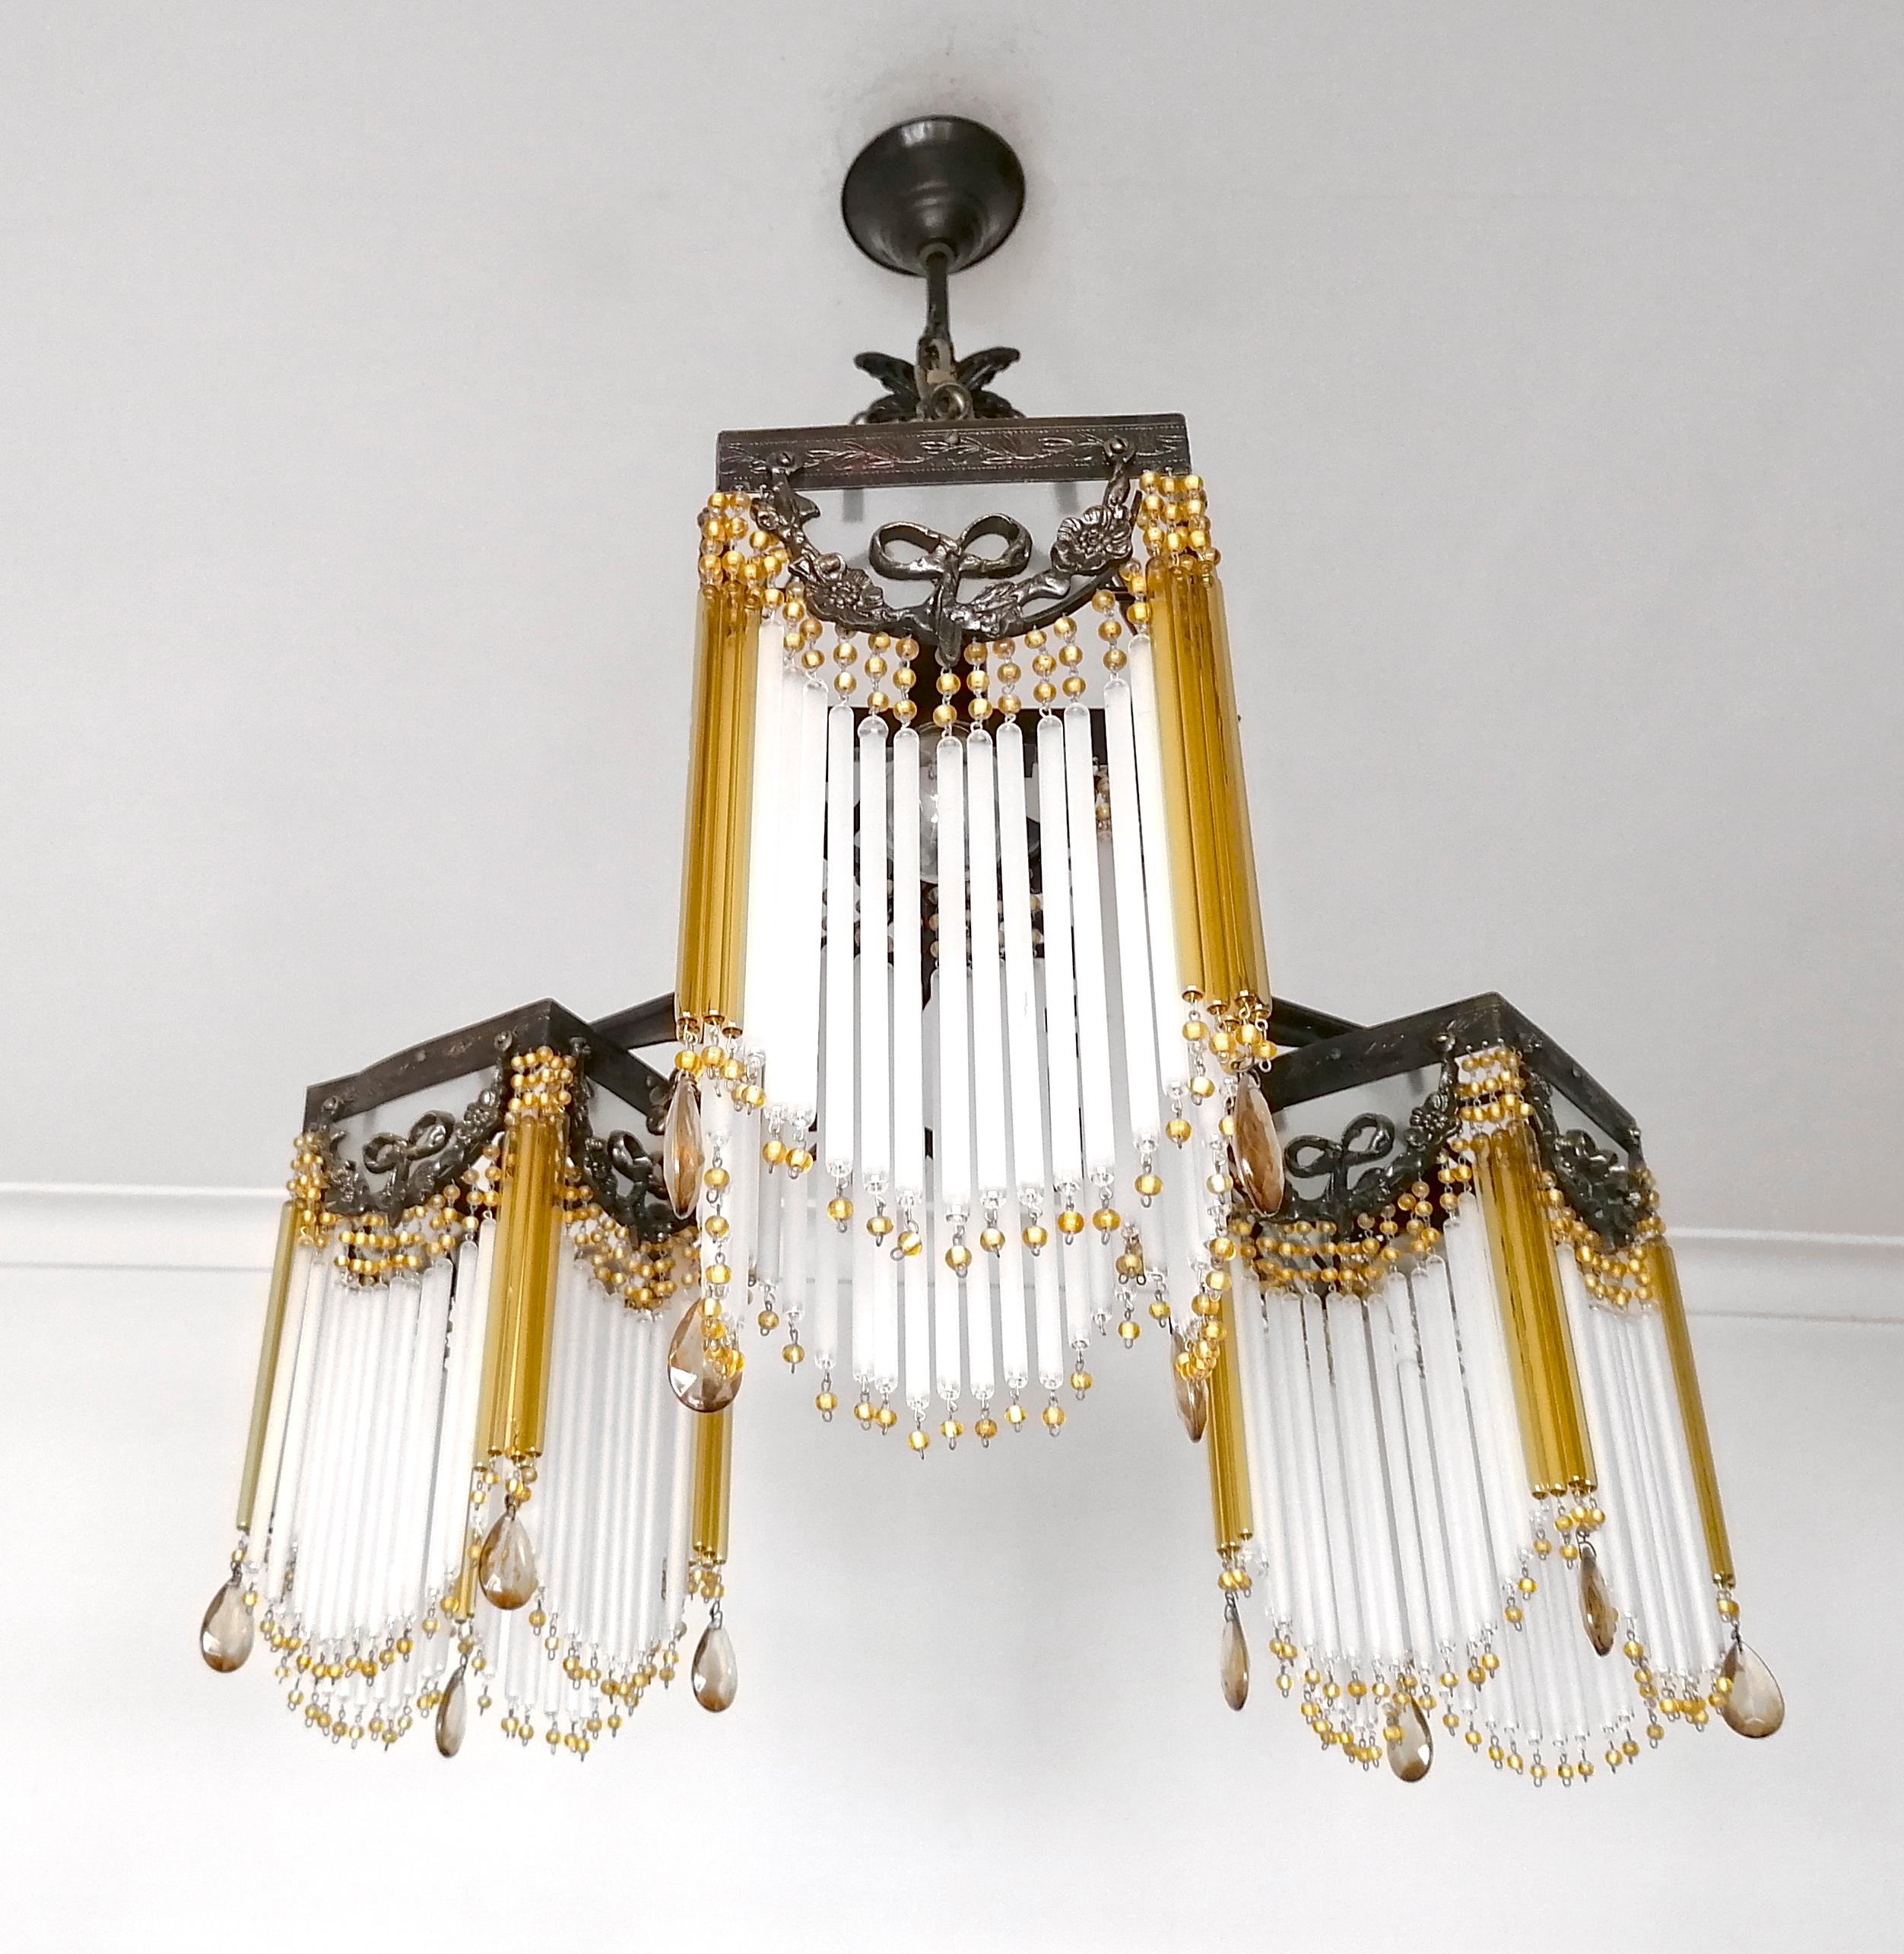 Frosted Ornate French Art Nouveau & Art Deco Beaded Amber Glass Straw Fringe Chandelier